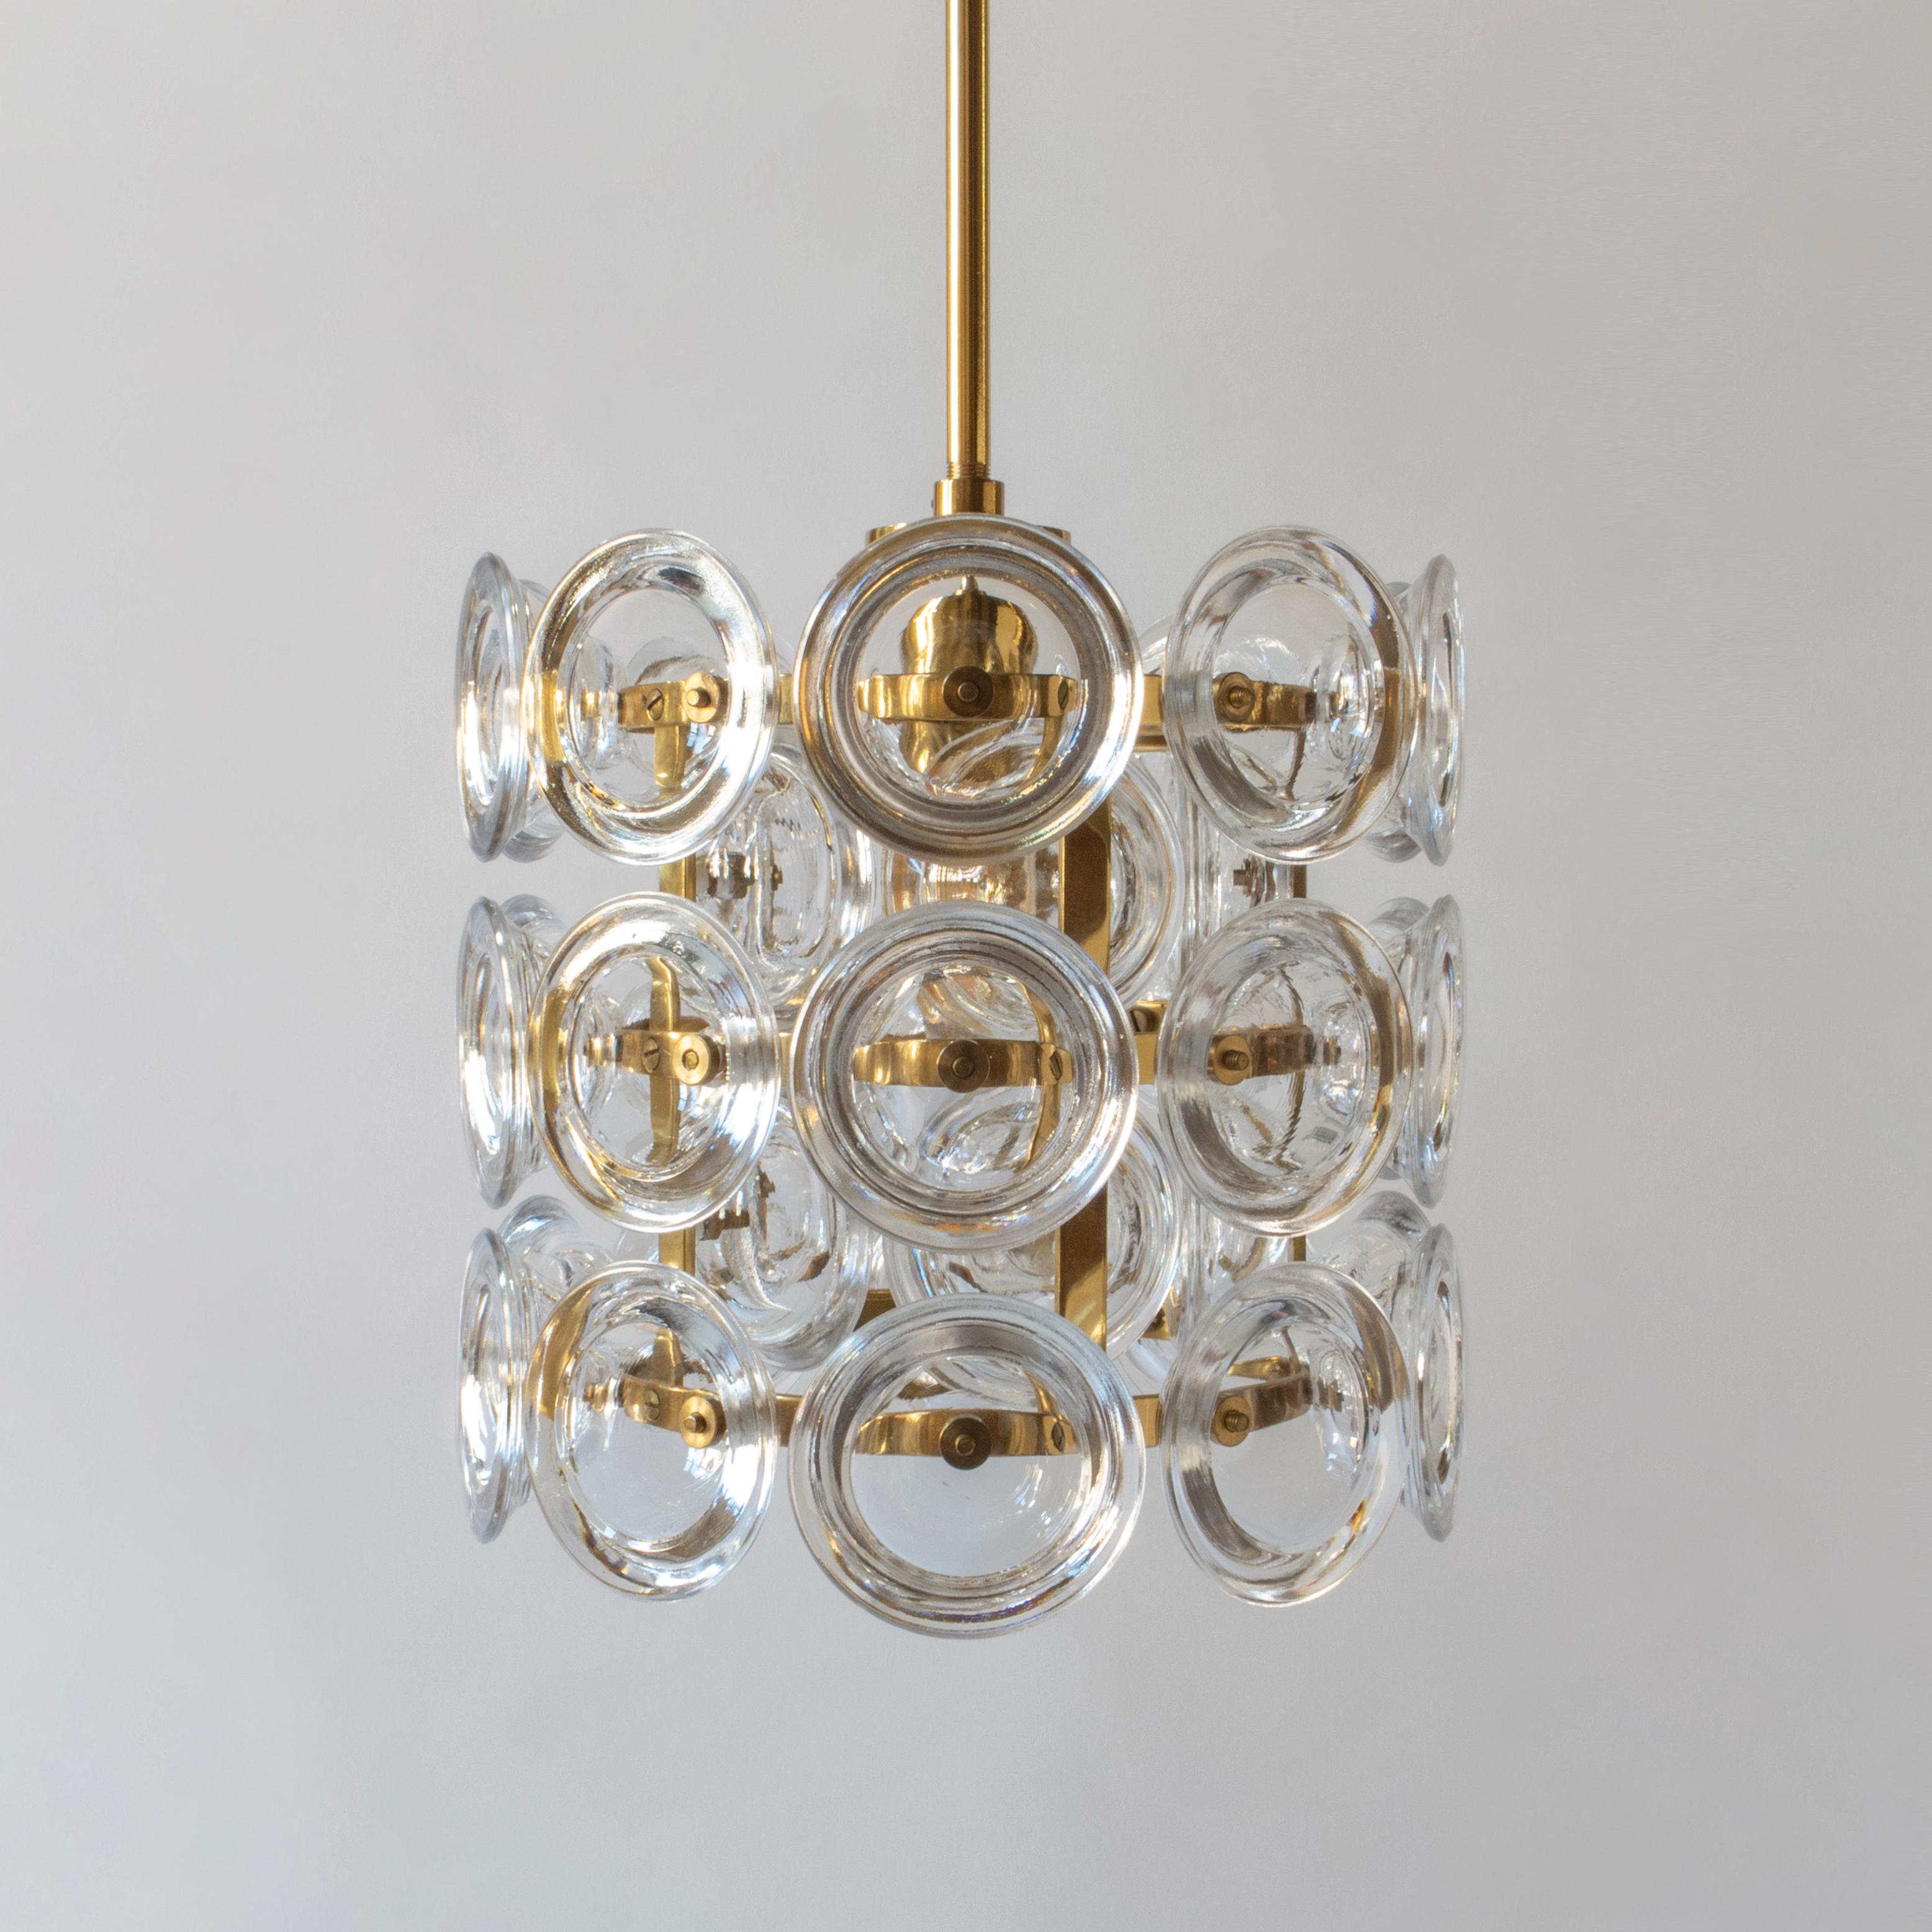 Each pendant composed of forty glass discs, fastened internally and externally to a brass frame, concealing a single e26 base light holder. Ready to add to your collection; each in beautiful condition, rewired and professionally restored. Height is